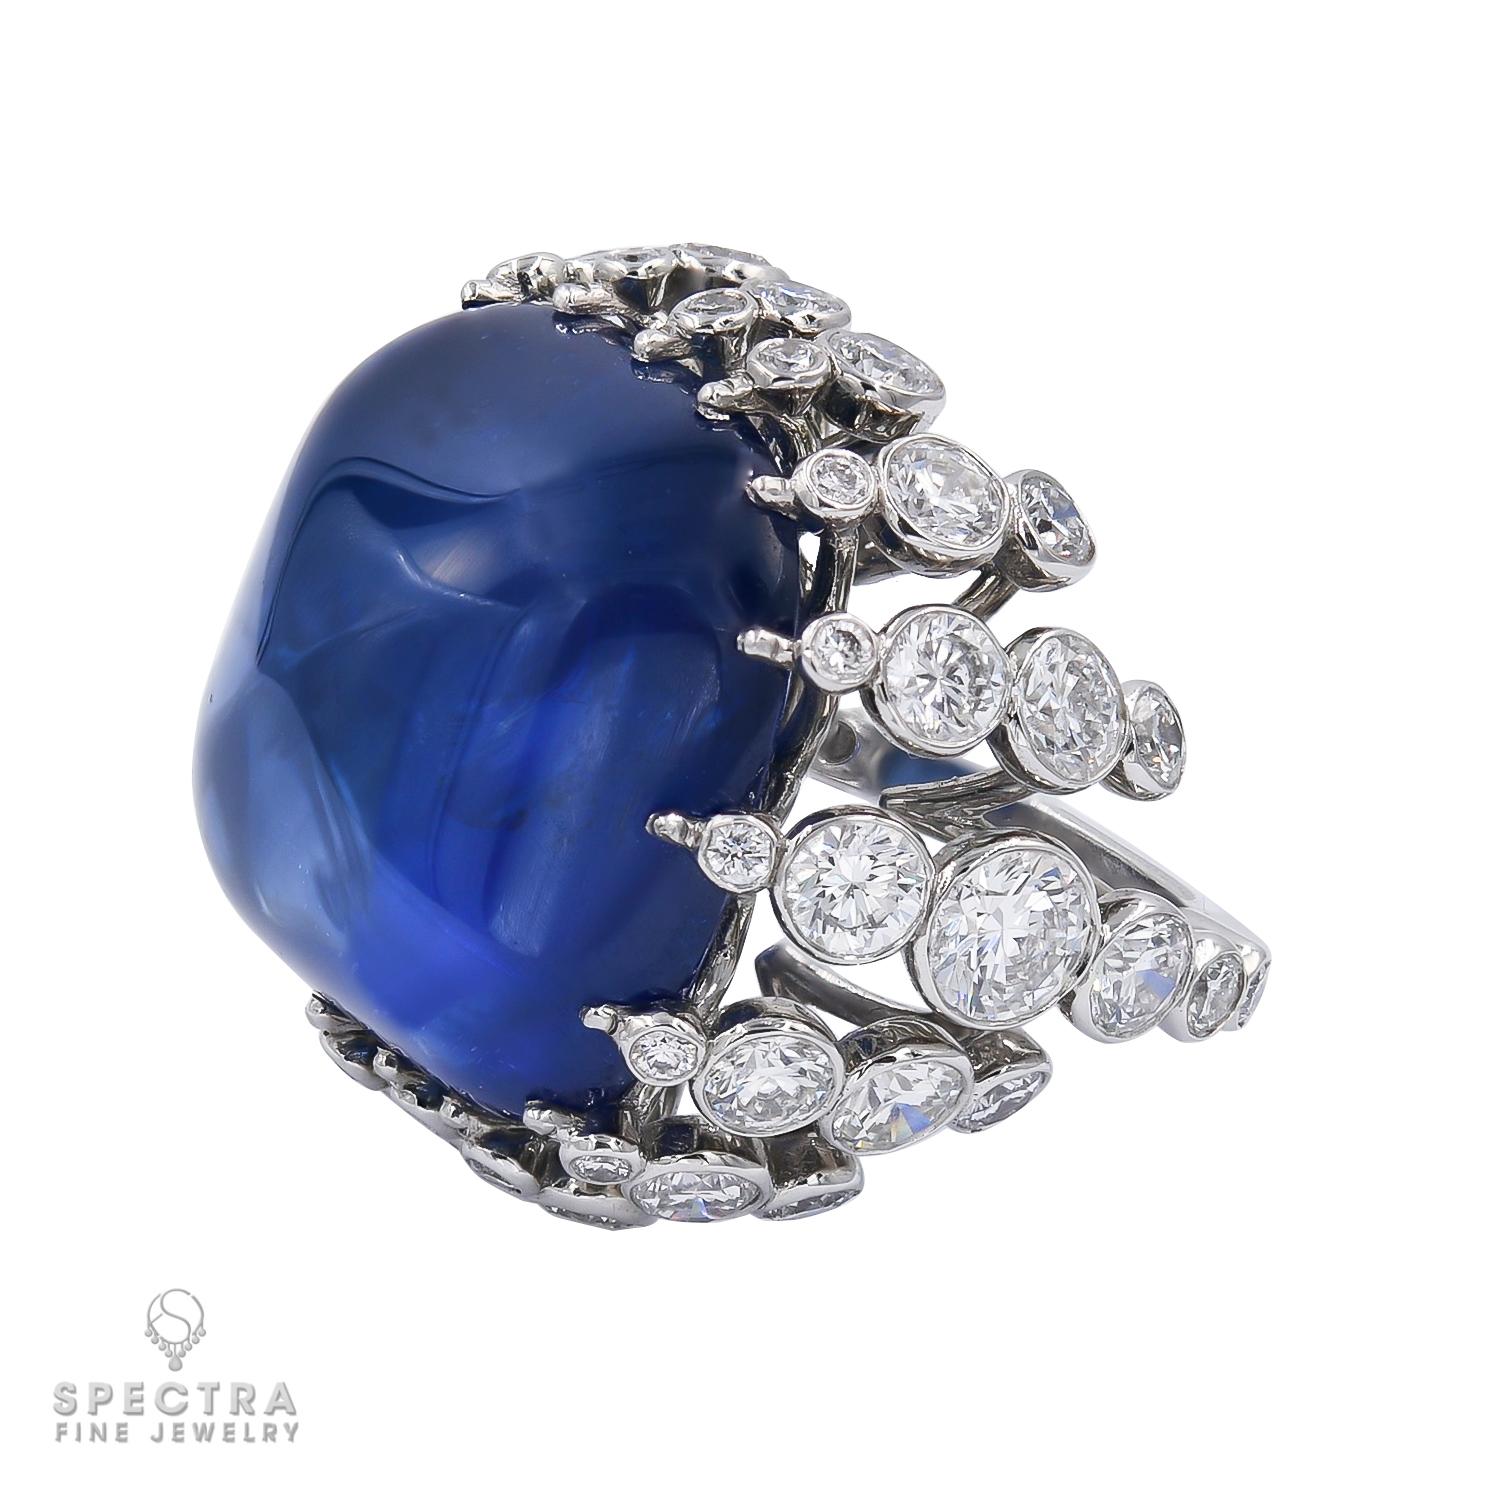 Sugarloaf Cabochon Spectra Fine Jewelry Certified 43.22 Carat Ceylon Sapphire Diamond Ring For Sale